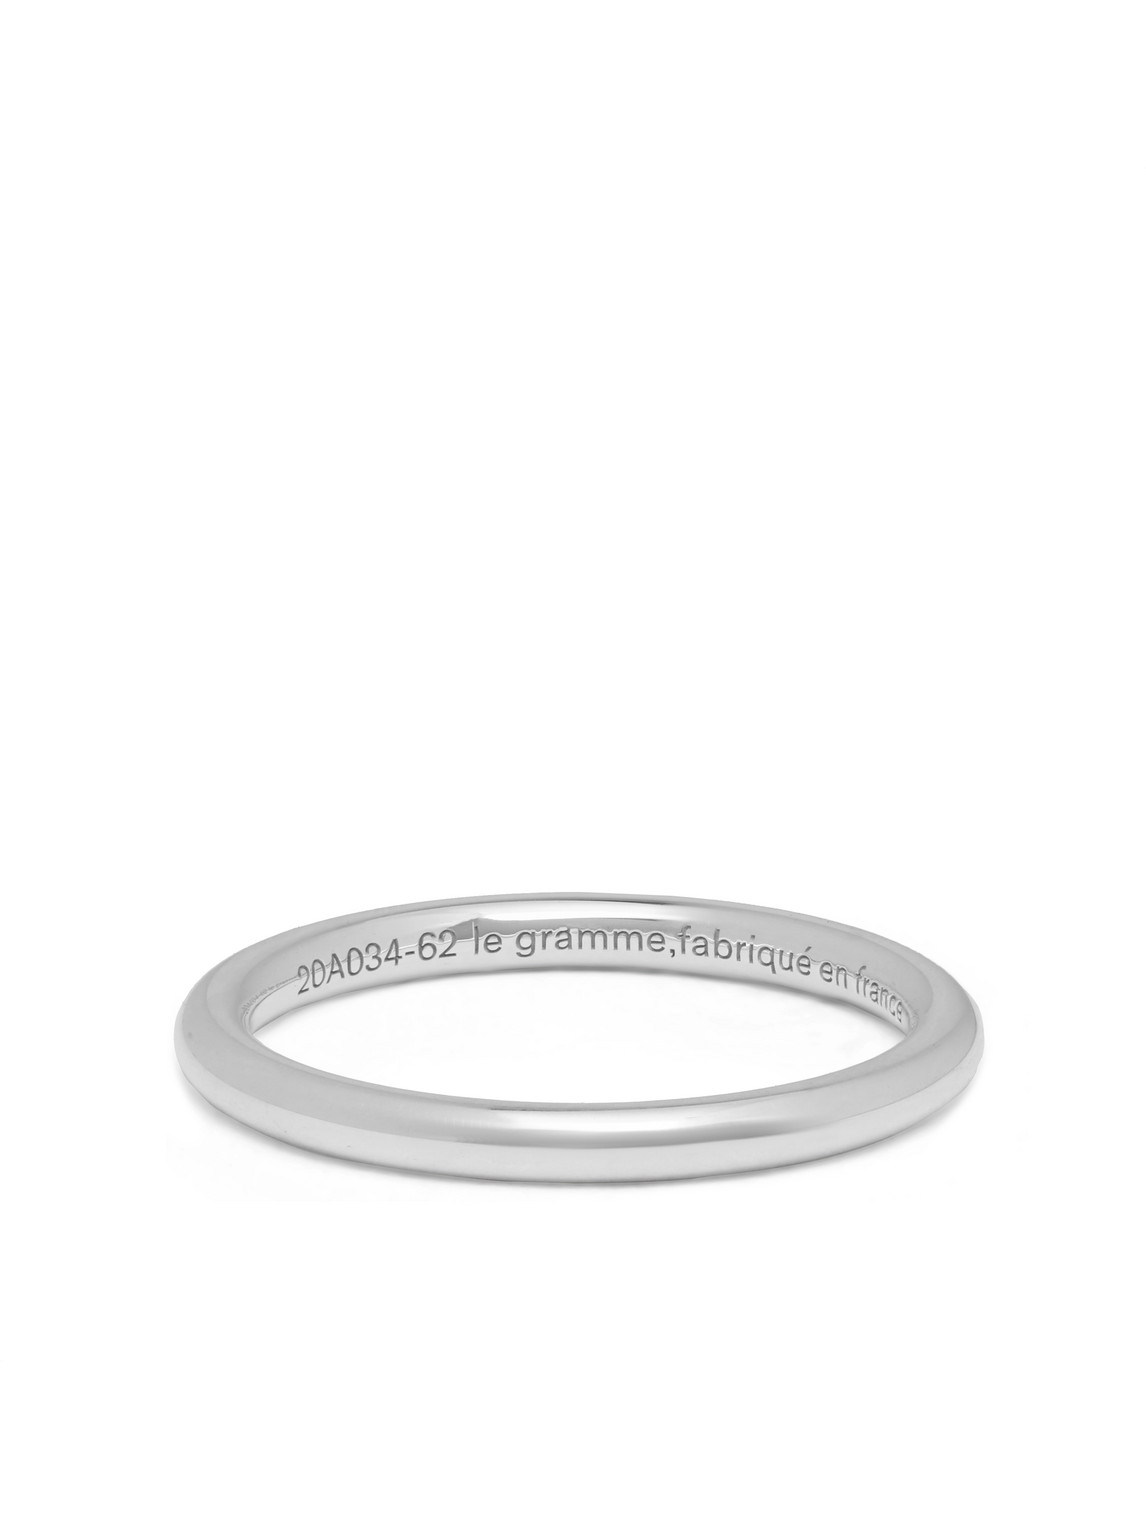 Le Gramme Le 3 Polished Sterling Silver Ring